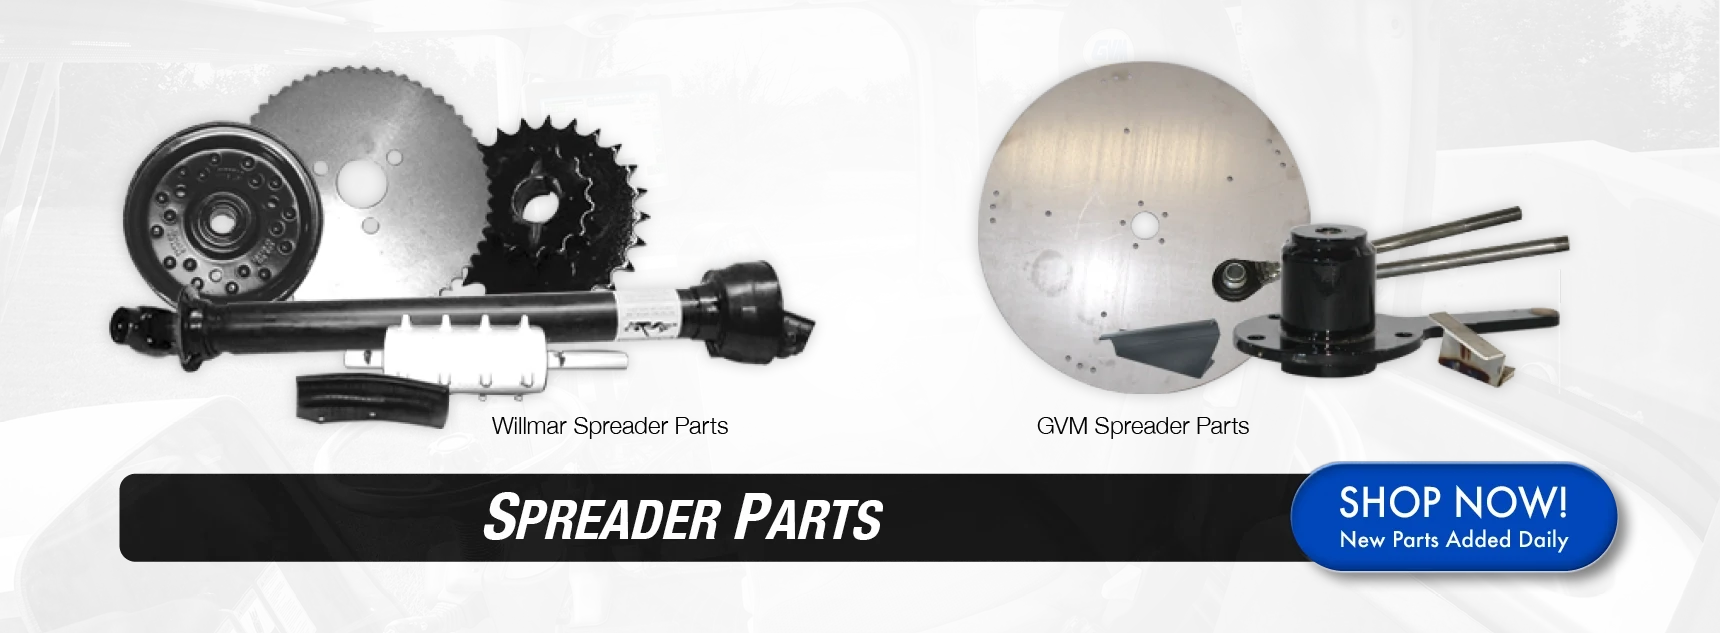 GVM and Willmar spreader parts and accessories: Belts, Chains, Spinner blades, spread pattern test kits, Chains